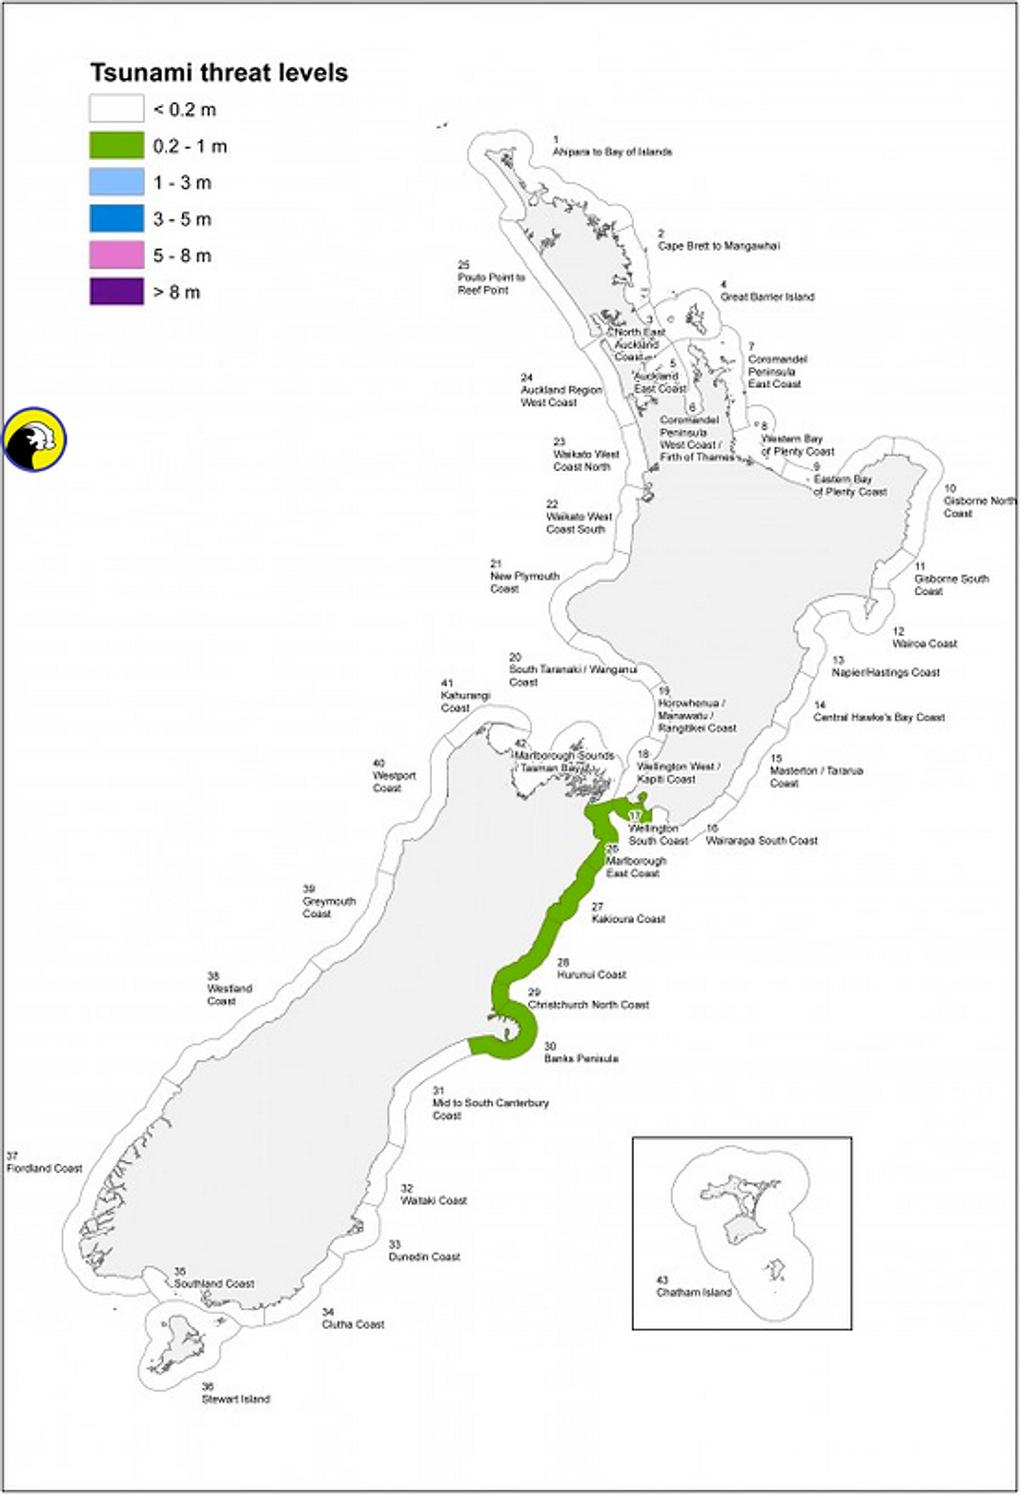 New Zealand tsunami status as at 1230hrs on Monday Nov 14, 2016. Issued by NZ Civil Defence © SW